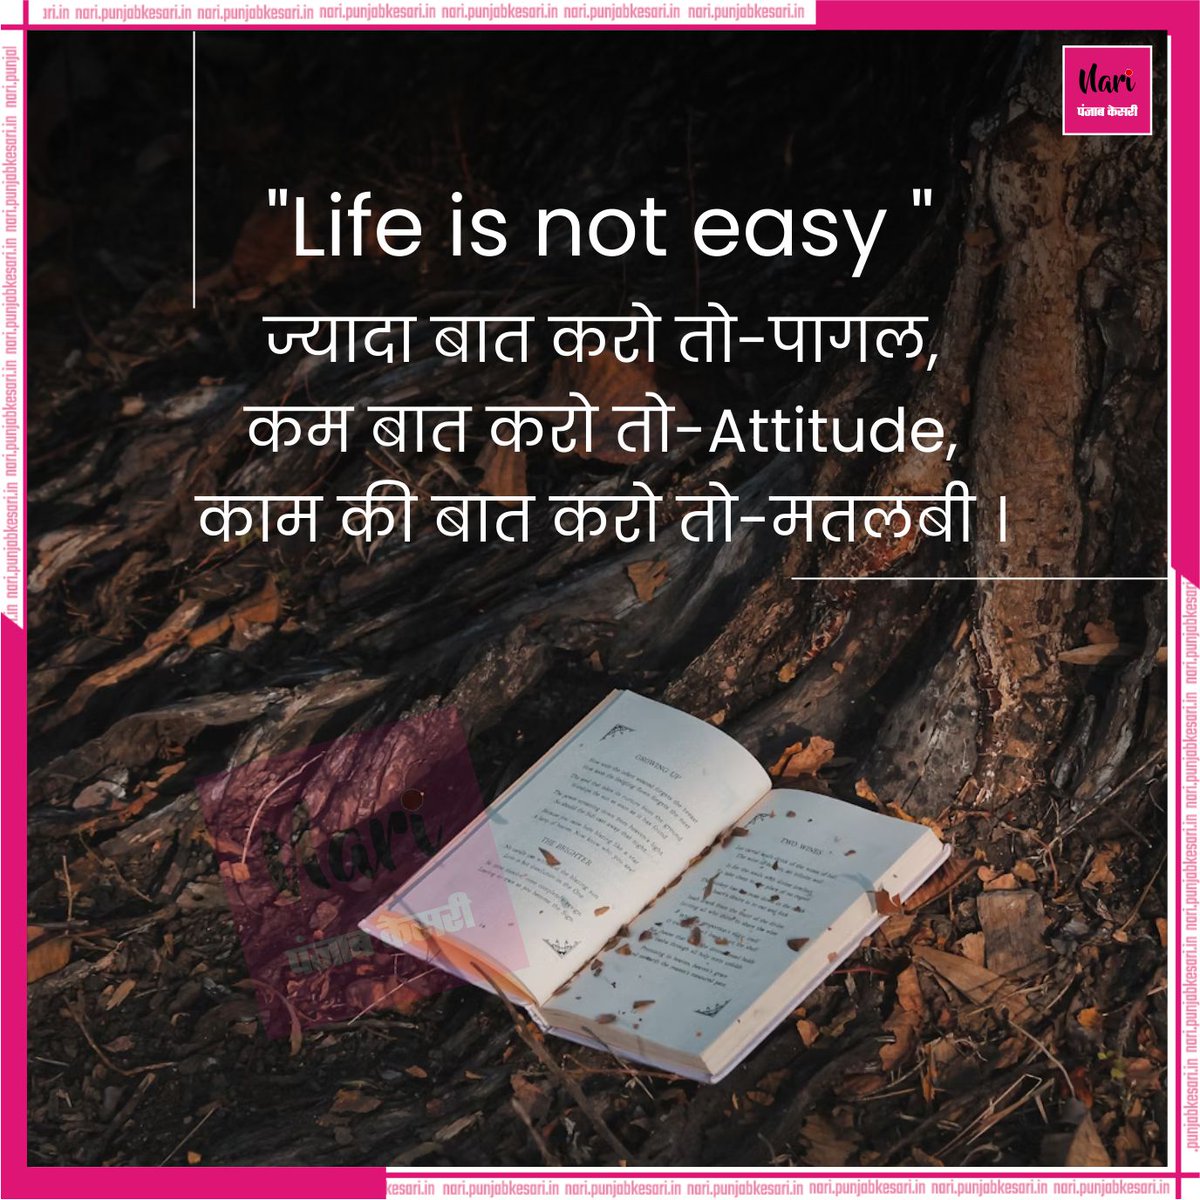 Thought of the day #Motivational #Inspirational #Lifequotes #Thoughtoftheday #life #quotes #motivationalquotes #mood #lovequotes #poetry #quoteoftheday #inspirationalquotes #world #writer #lifequotes #shayari #quote #feelings